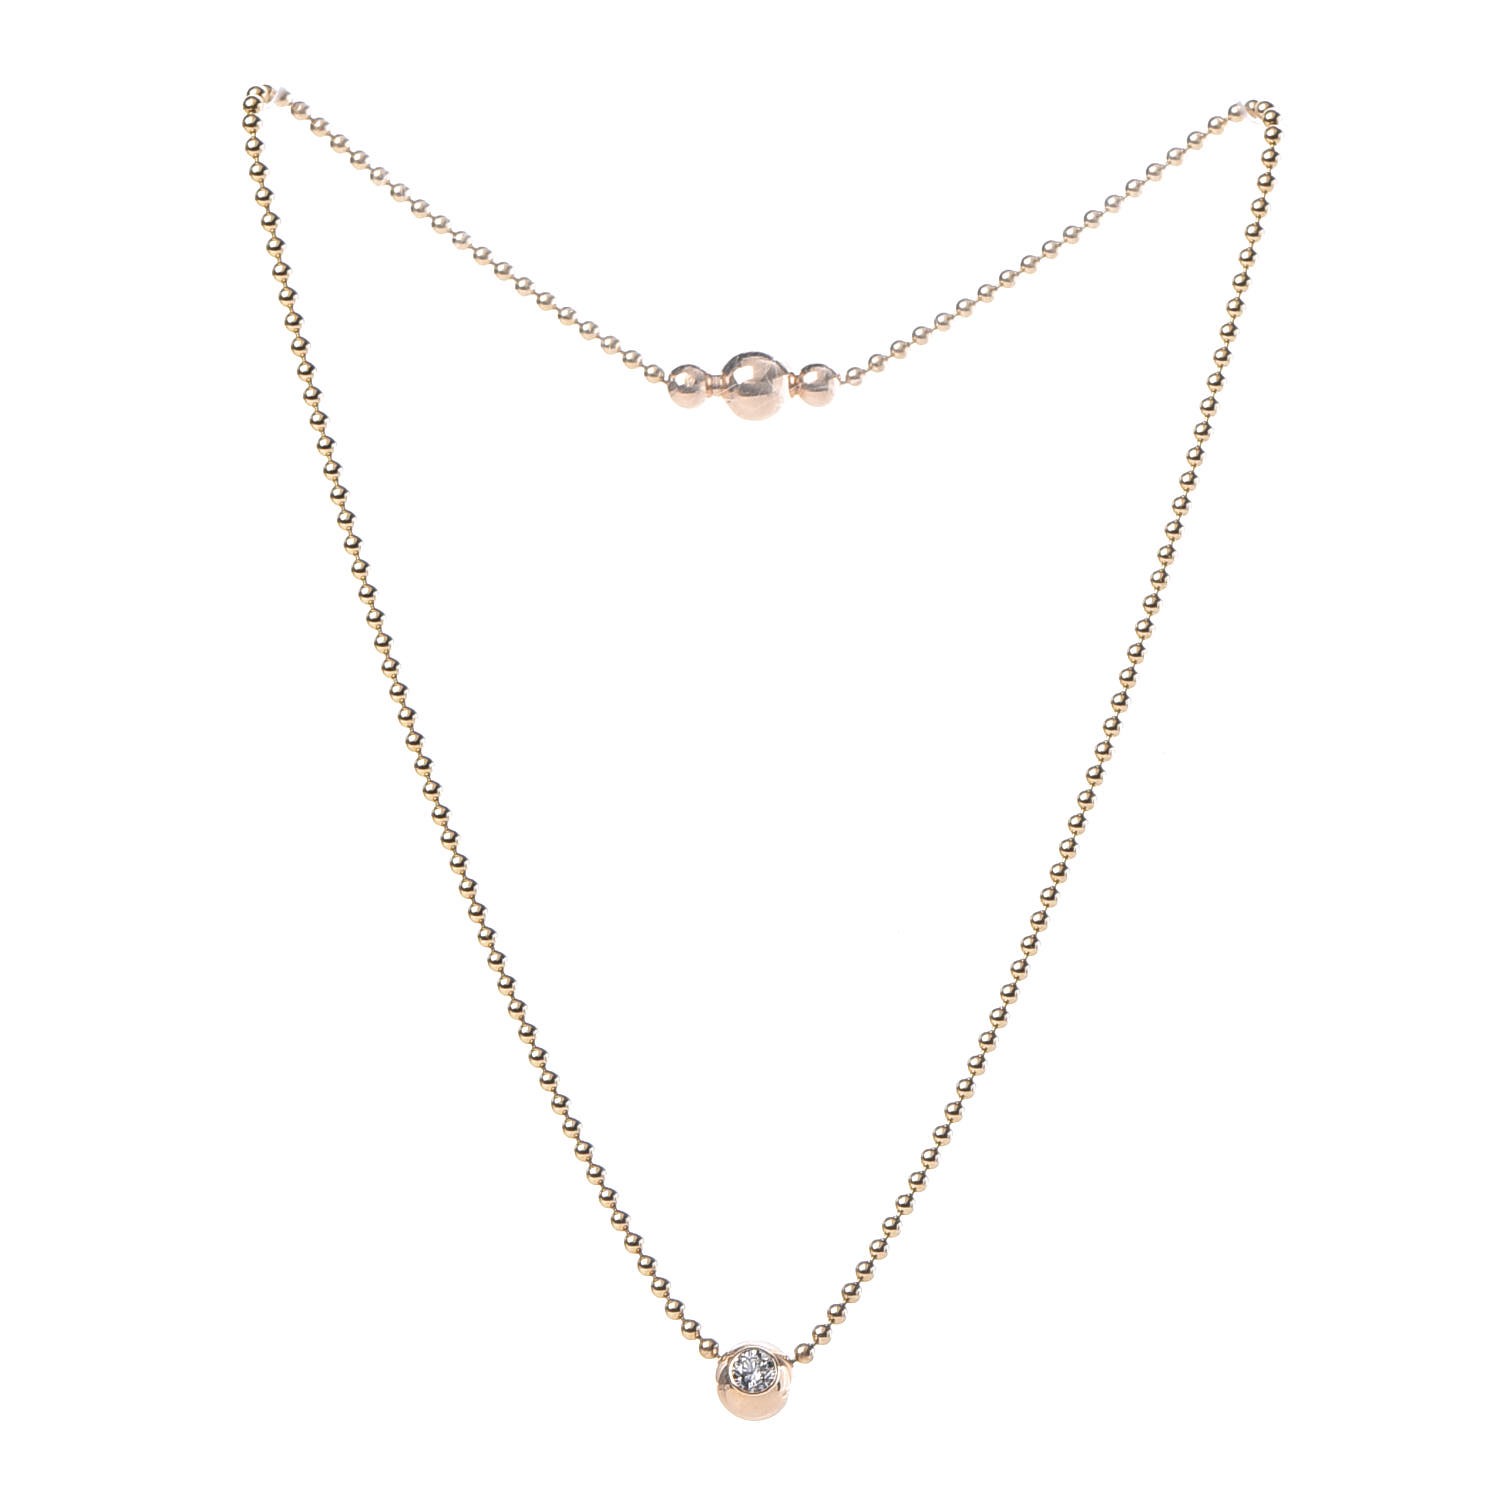 CARTIER 18K Yellow Gold Diamond Beaded Chain Necklace 339915